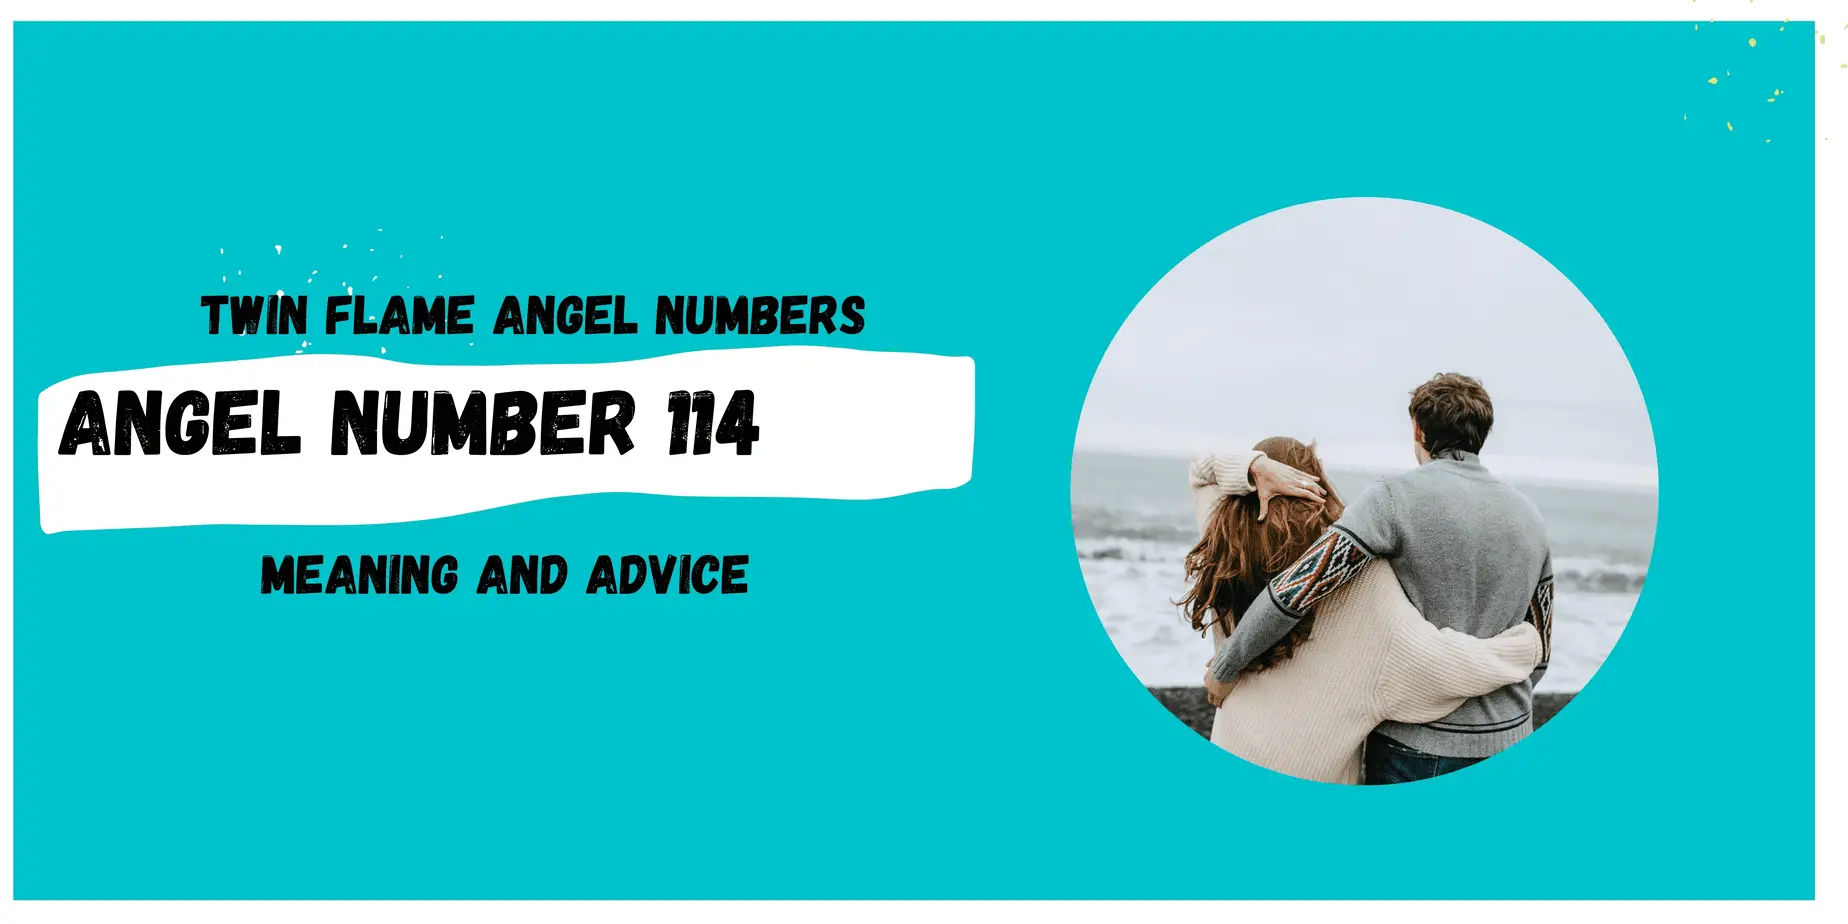 What Is The Meaning Of Angel Number 114?